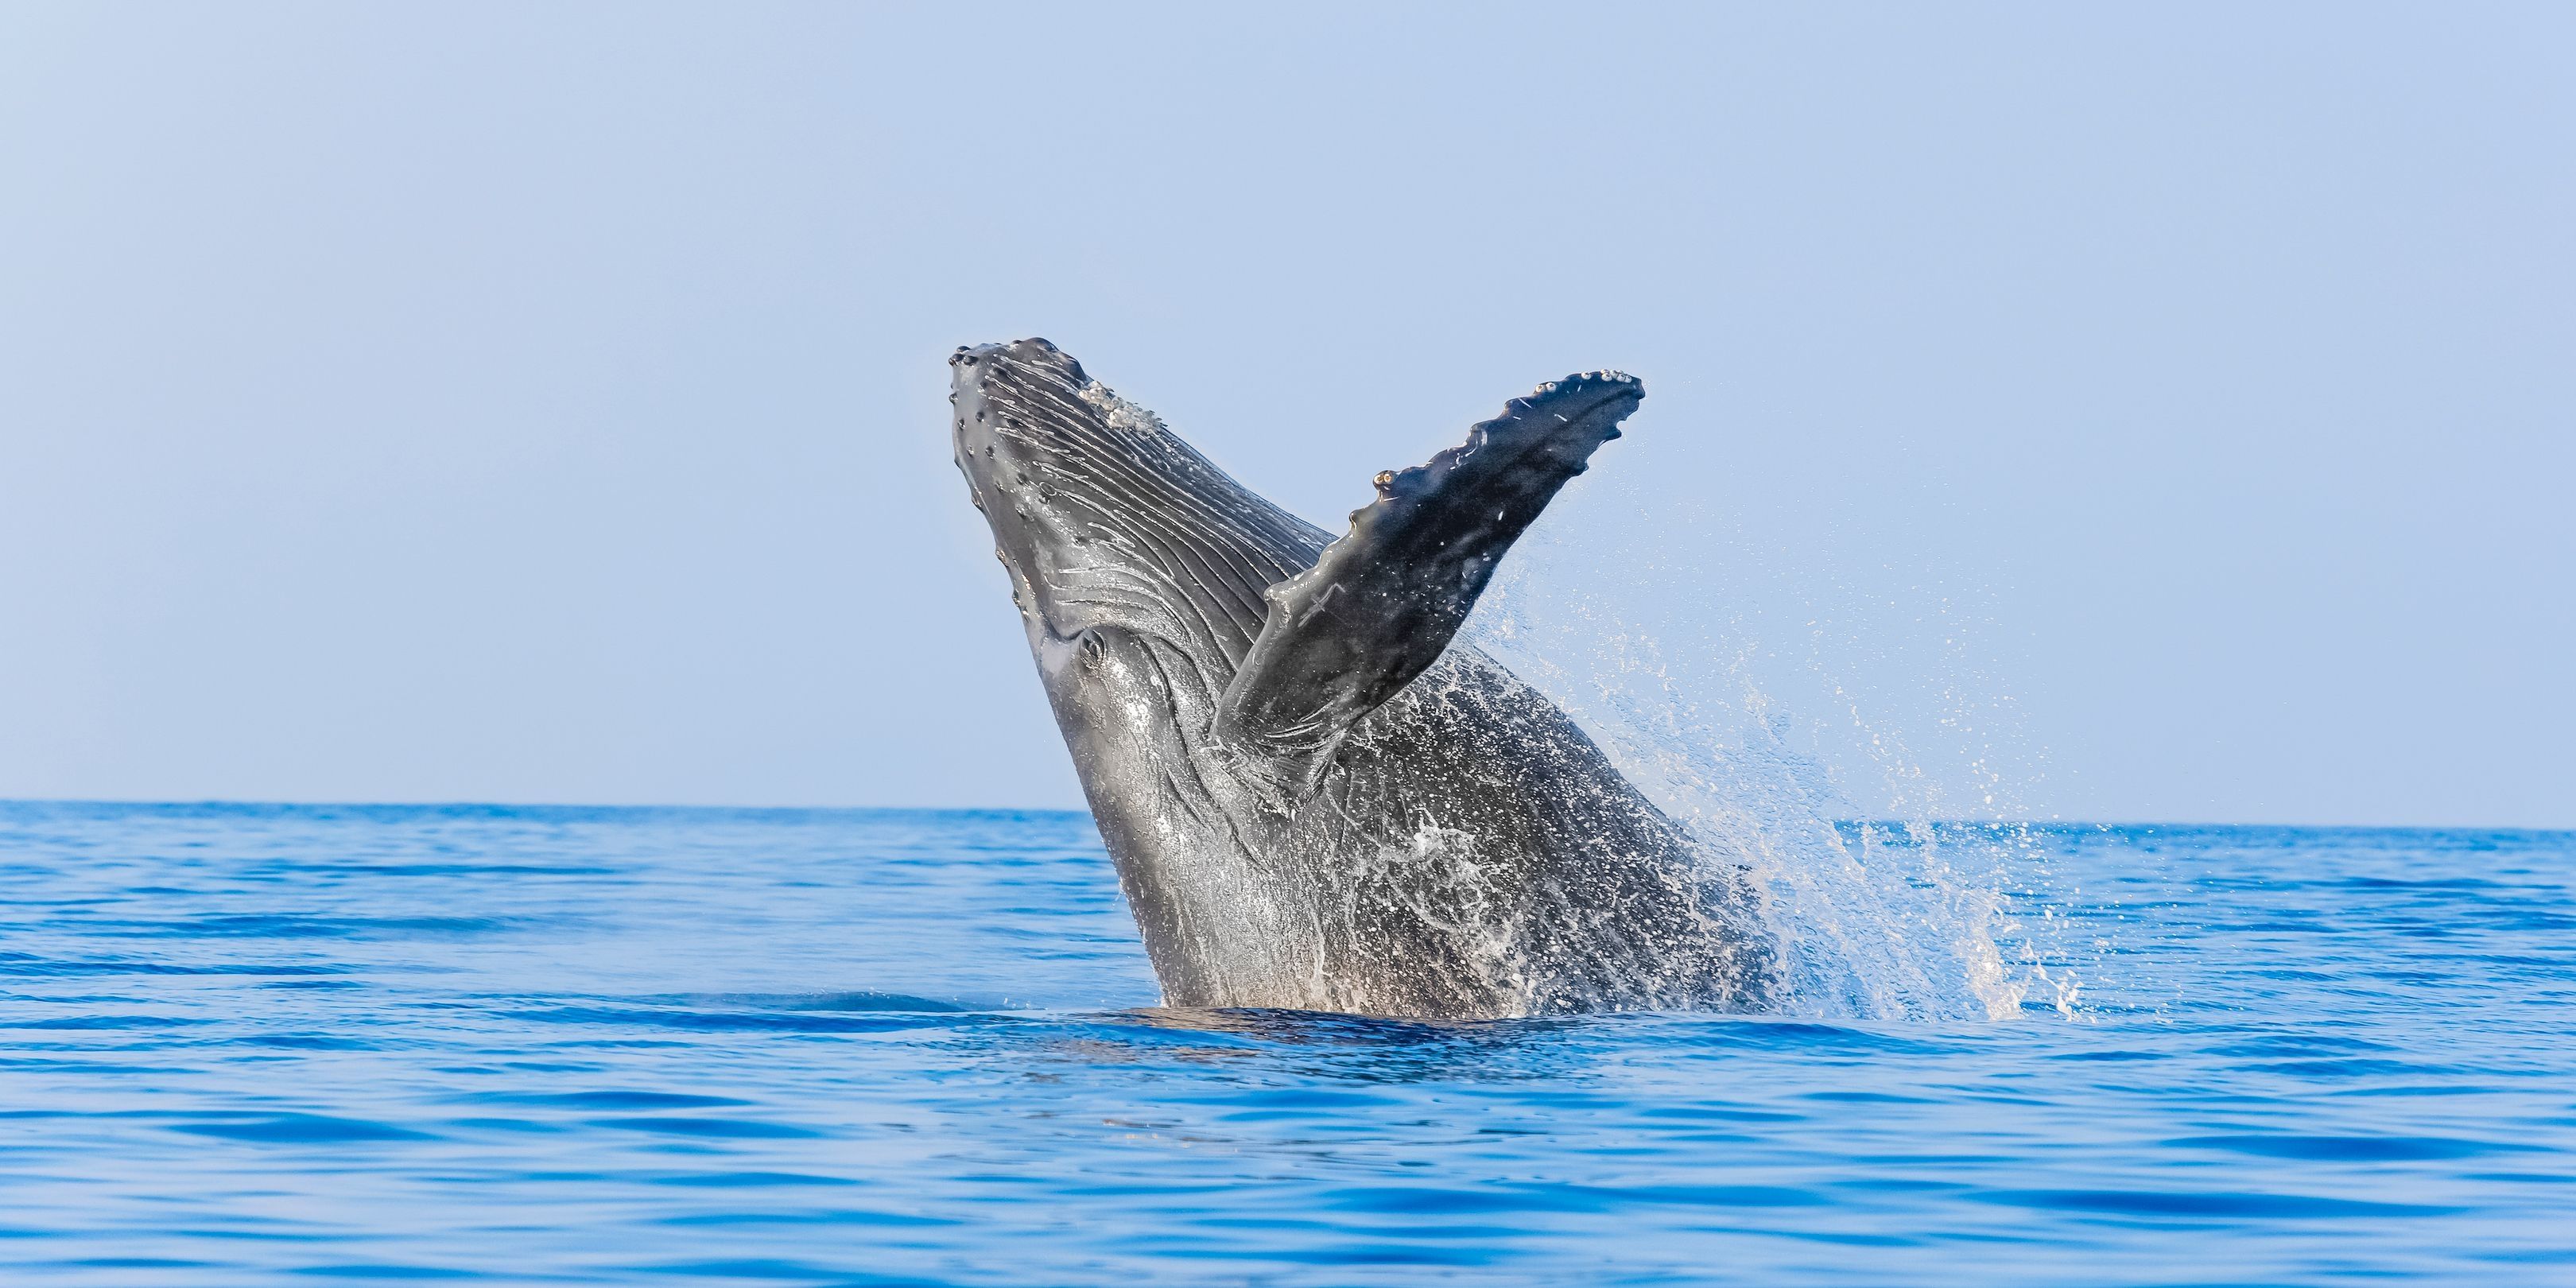 Luxury whale watching tour